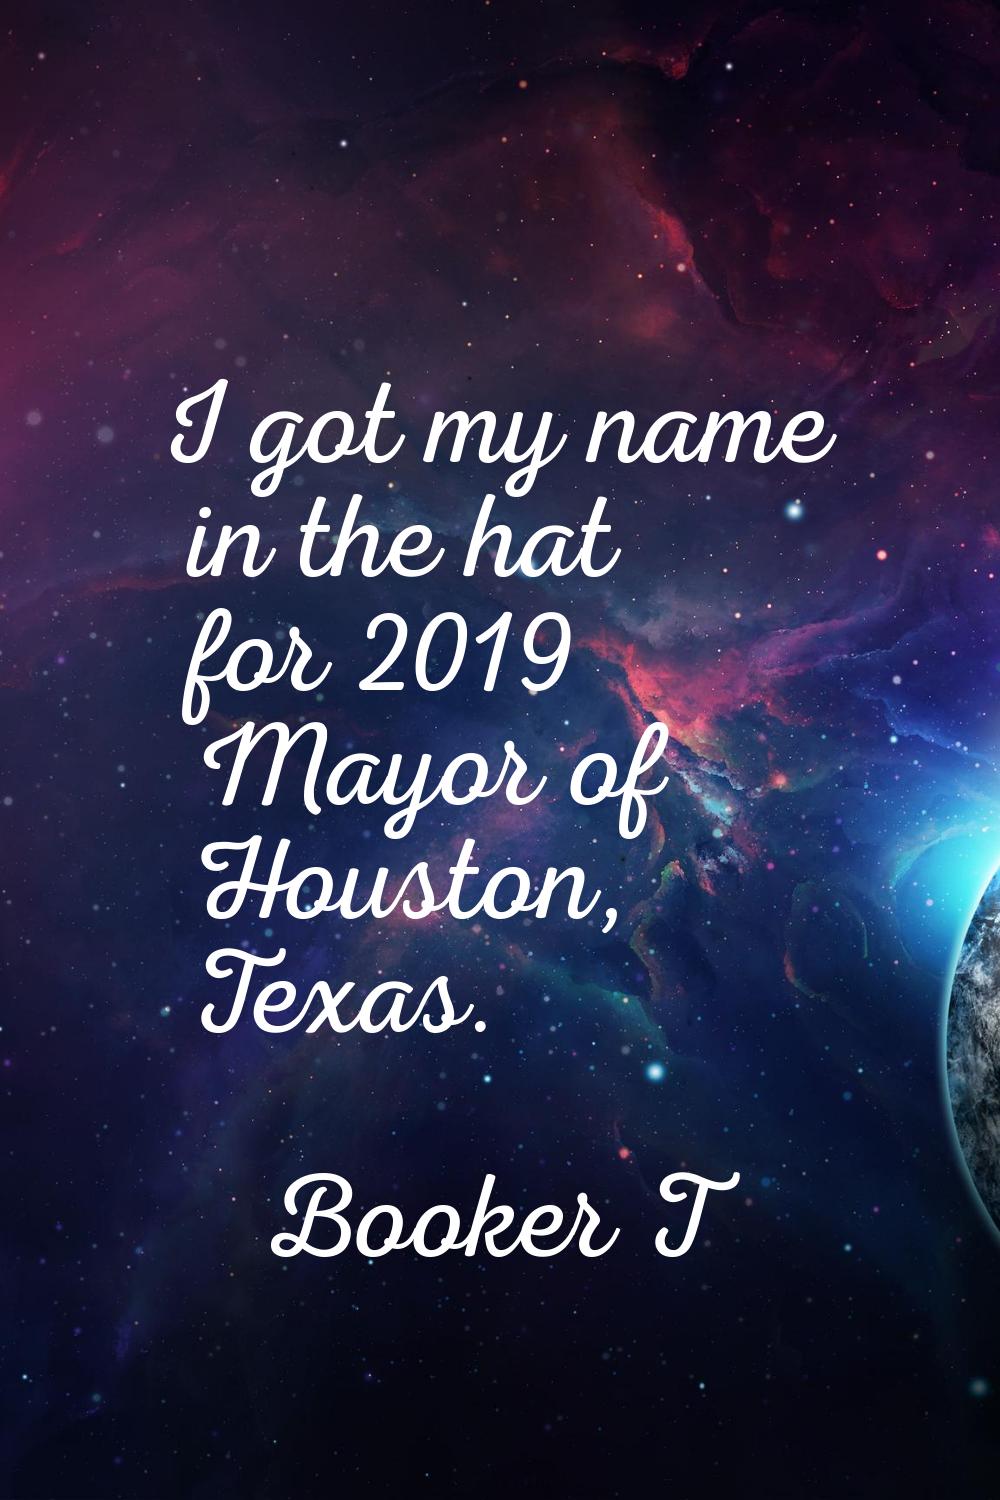 I got my name in the hat for 2019 Mayor of Houston, Texas.